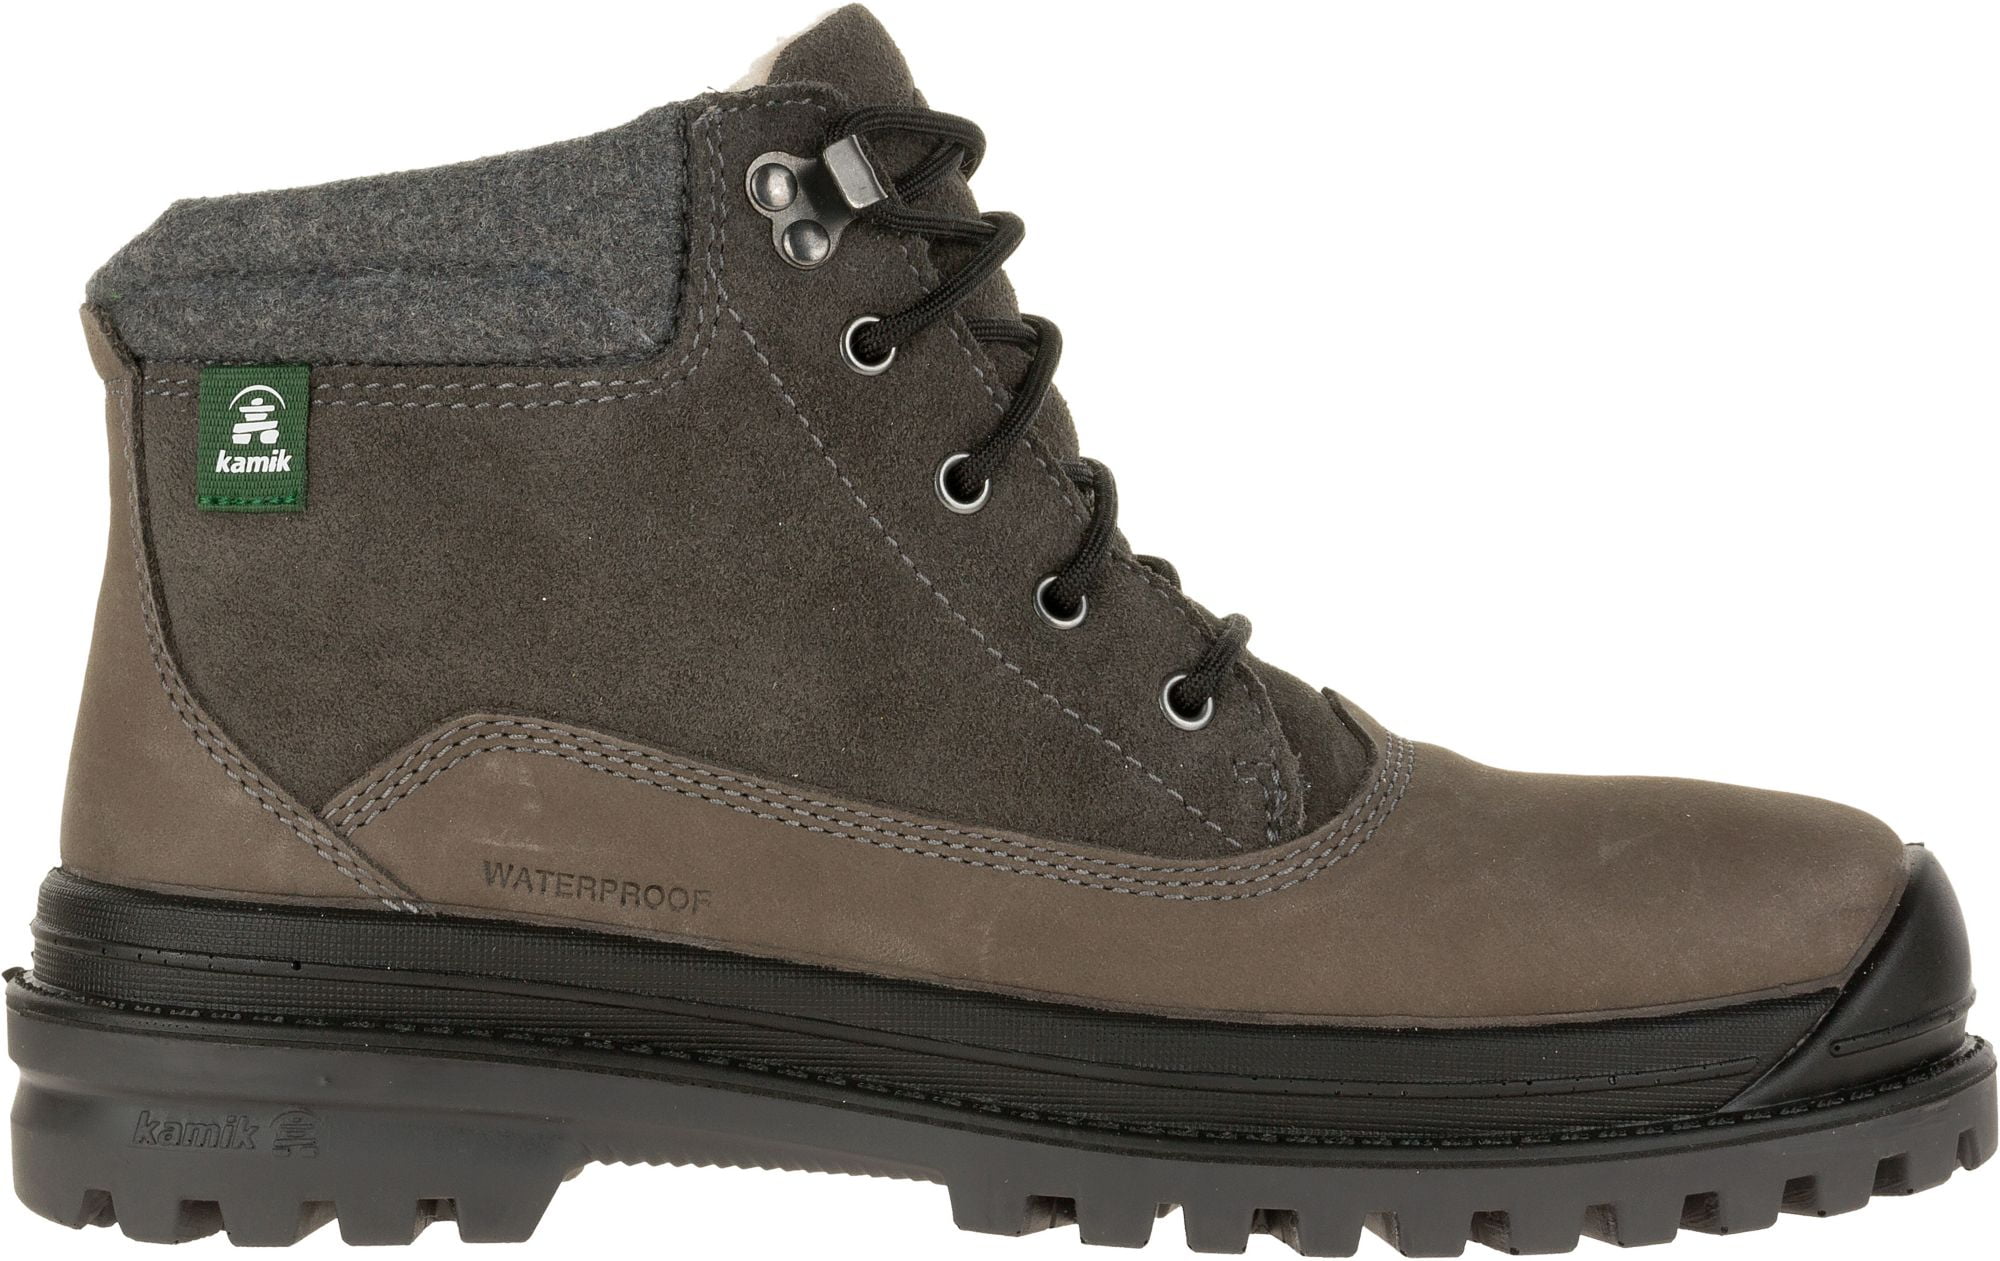 Griffon 200g Mid Winter Boots, Charcoal 